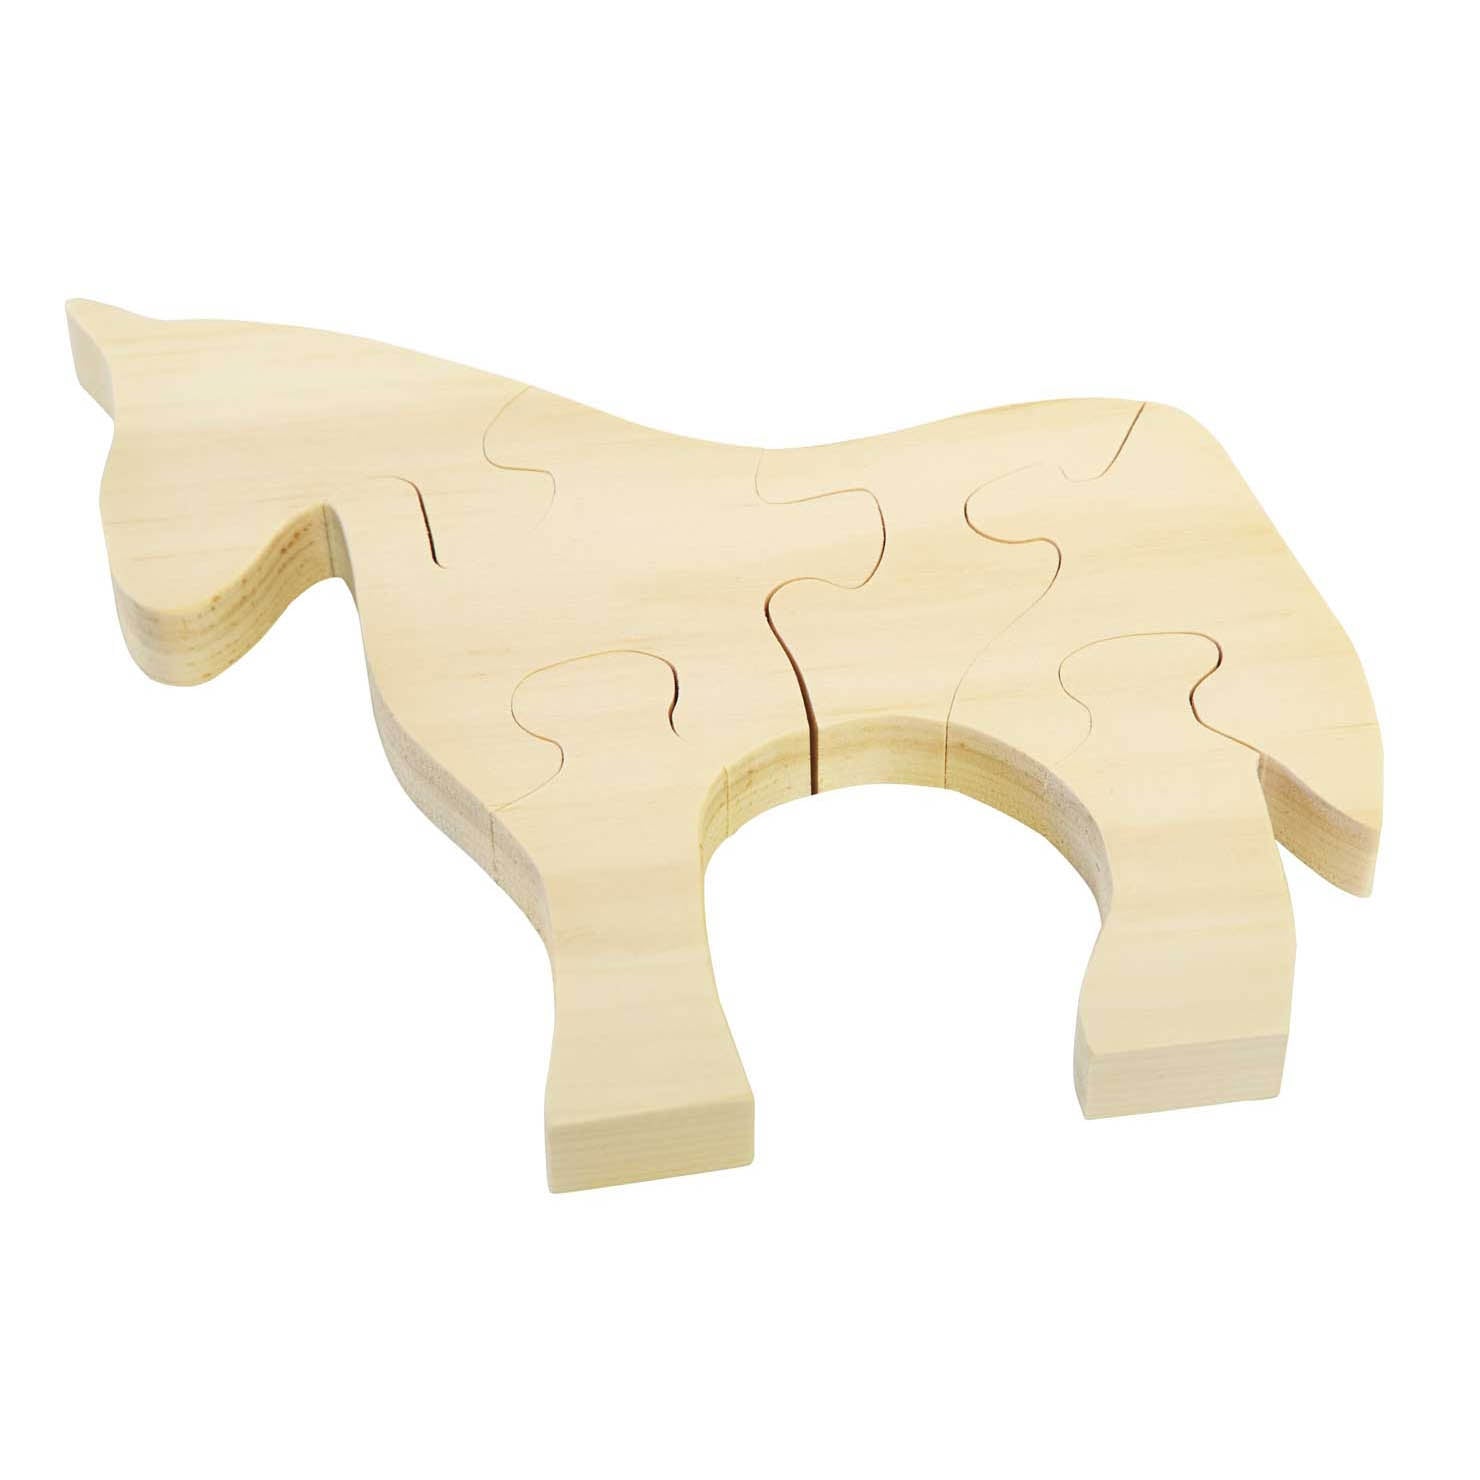 Wooden Jigsaw Puzzle - snyders.furniture